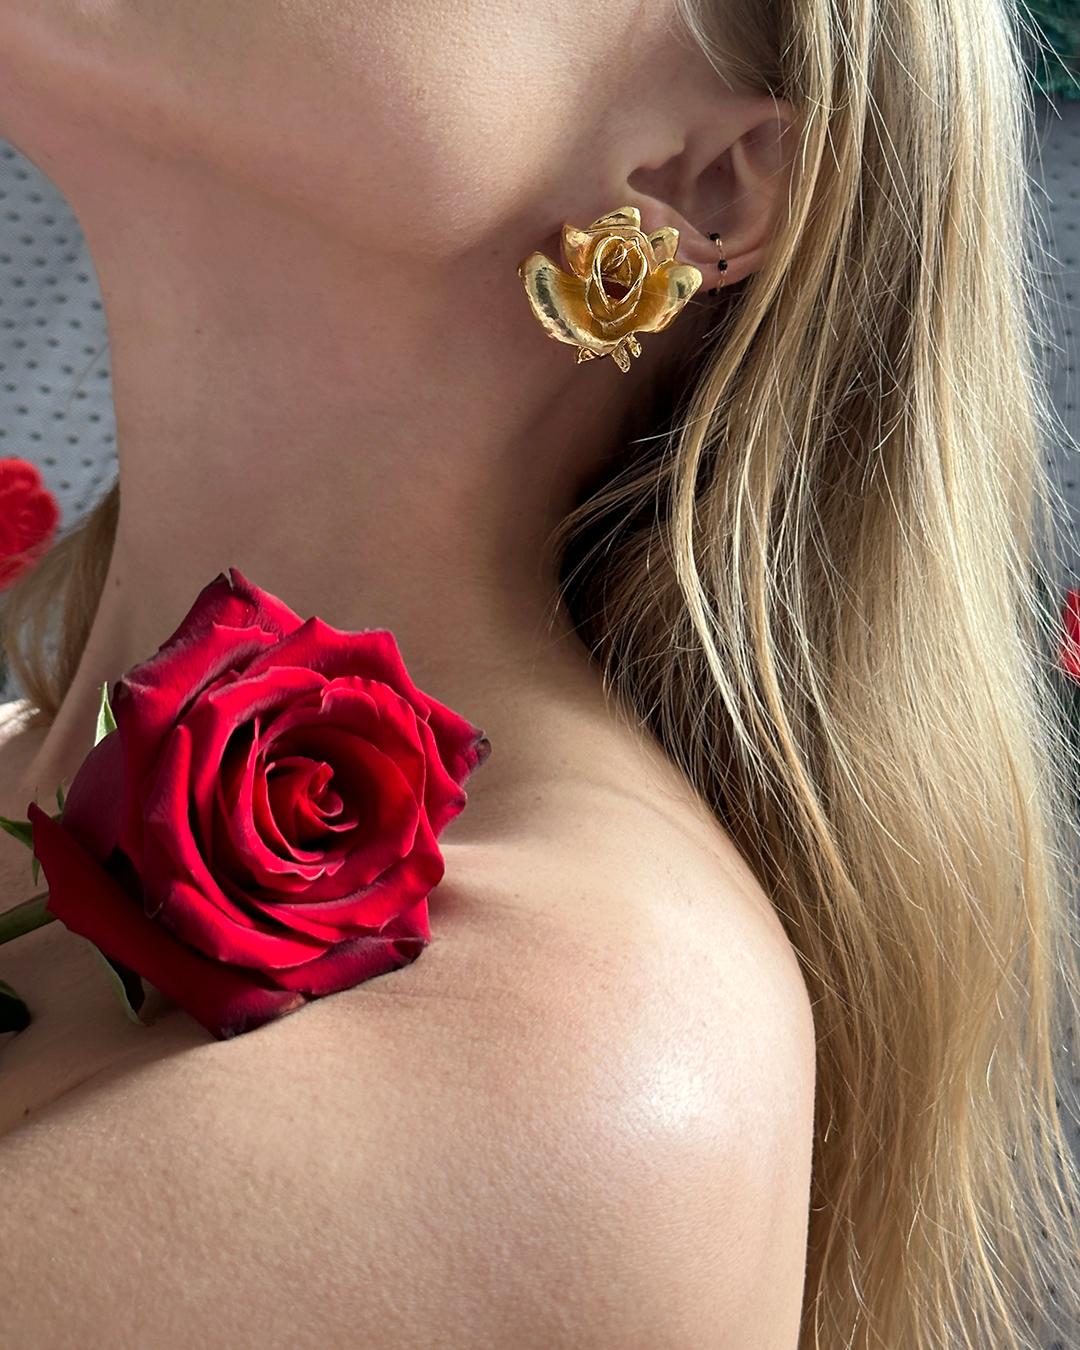 VERY BREEZY presents: These vintage rose earrings depict a figural flower, sculpted with lifelike three-dimensional detail, in a rich matte-finish gold. They sit on the earlobe, measuring about 3.5 cm long x 3.5 cm wide. Finished with a clip-on